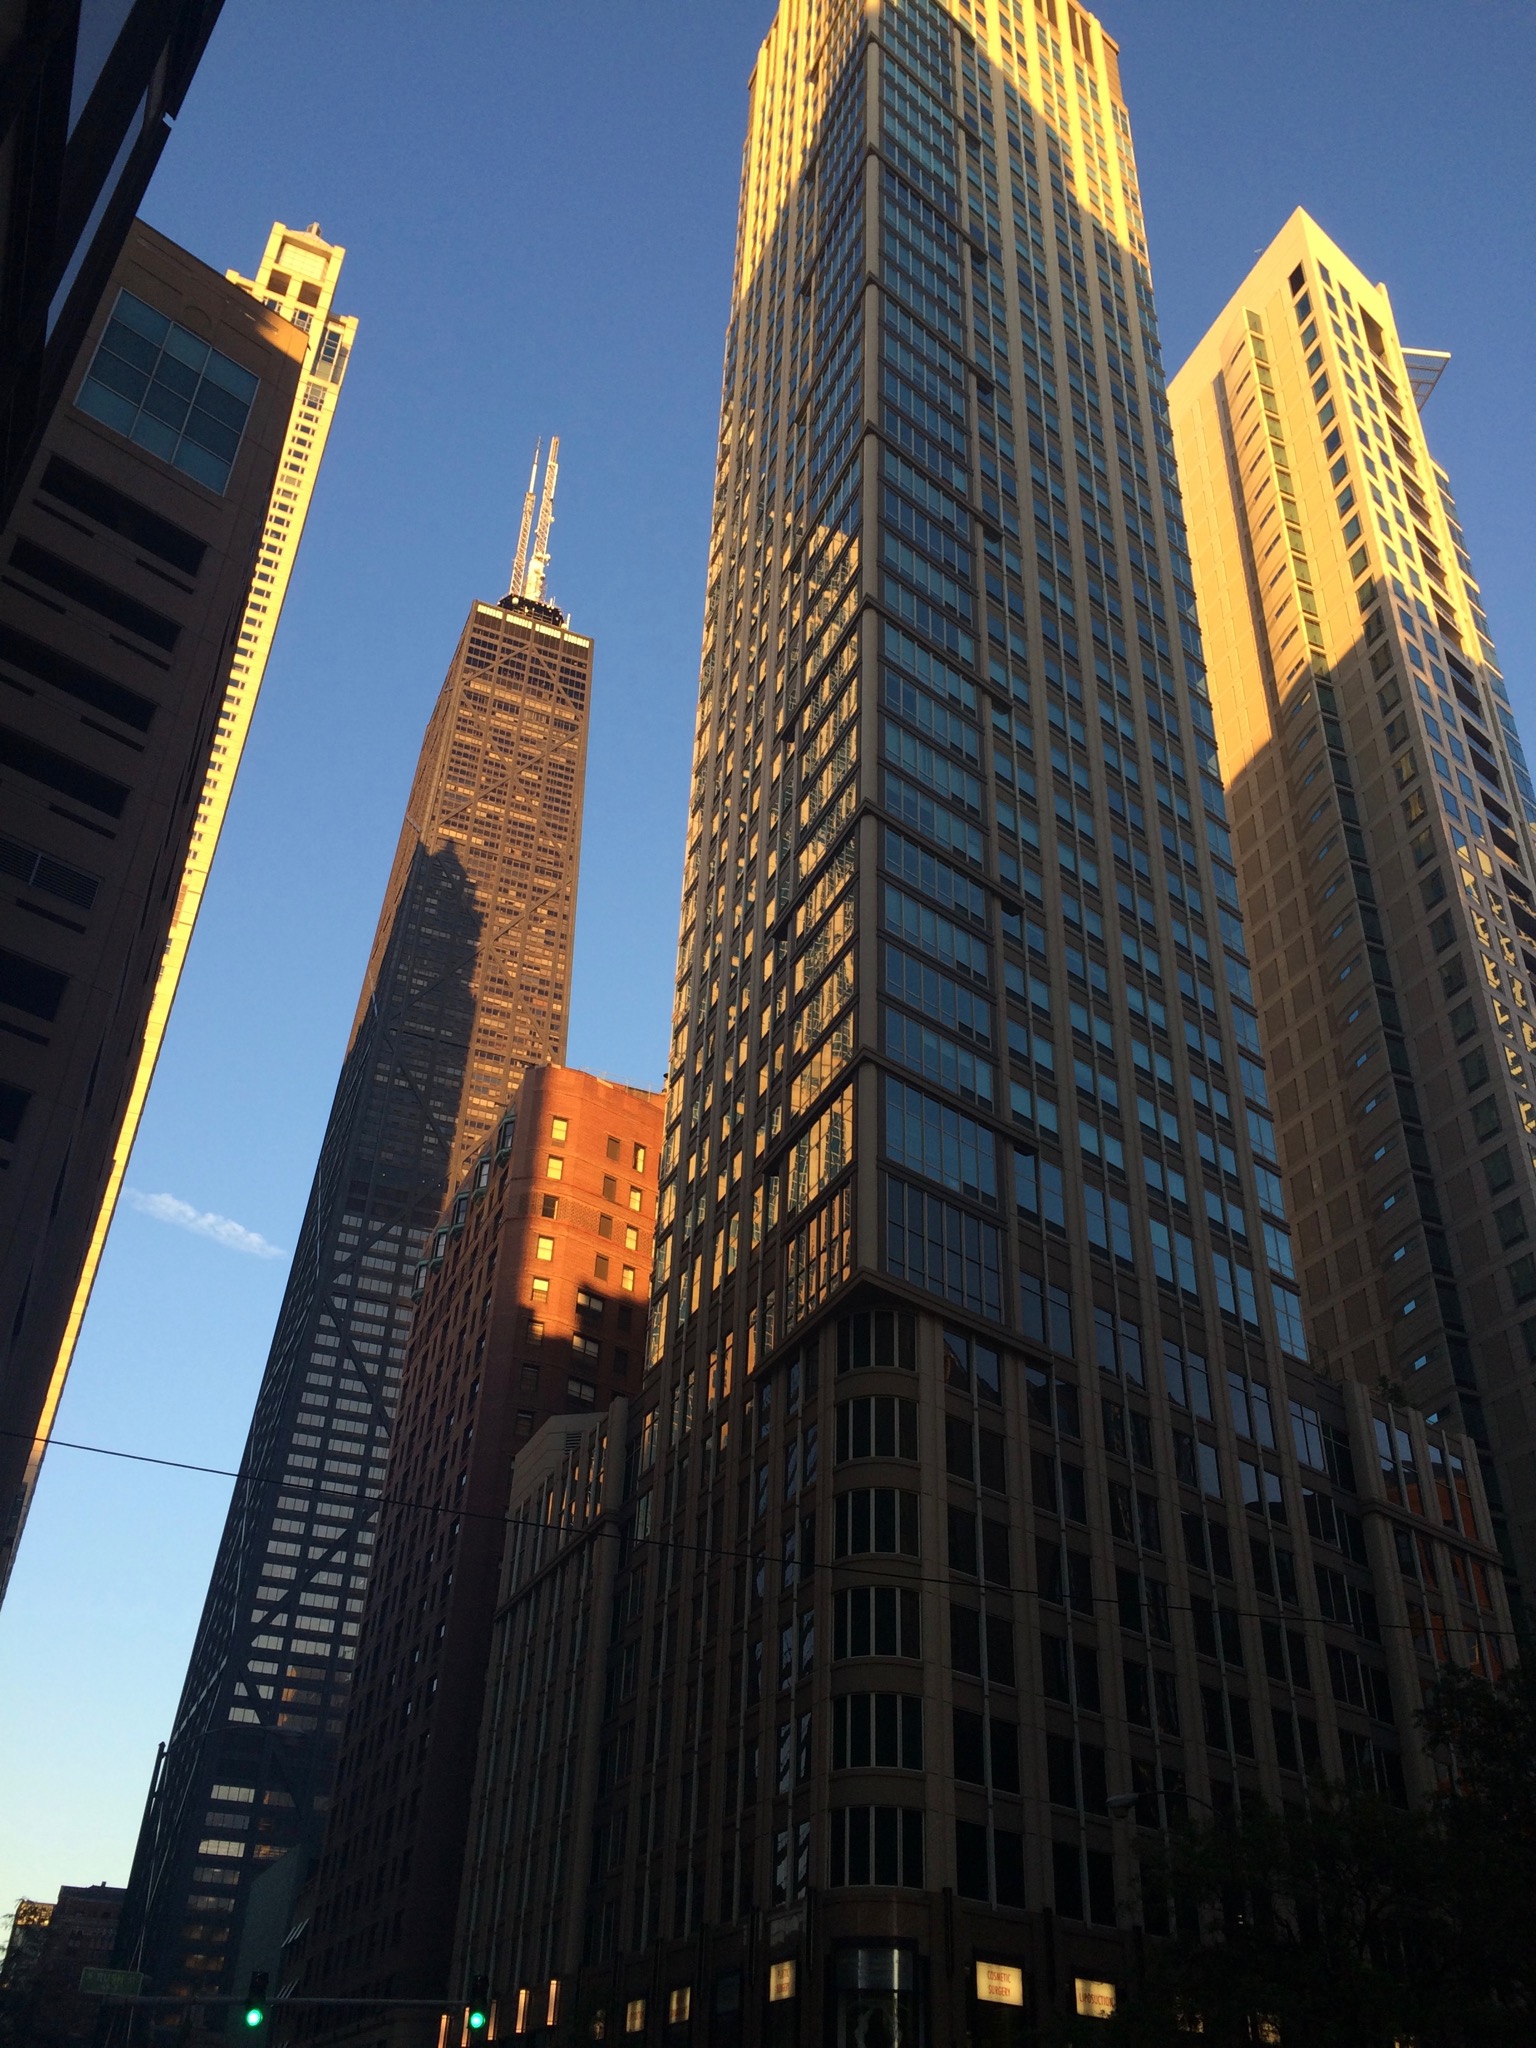 Photo 116 of 135 from the album Highlights Chicago 2015.